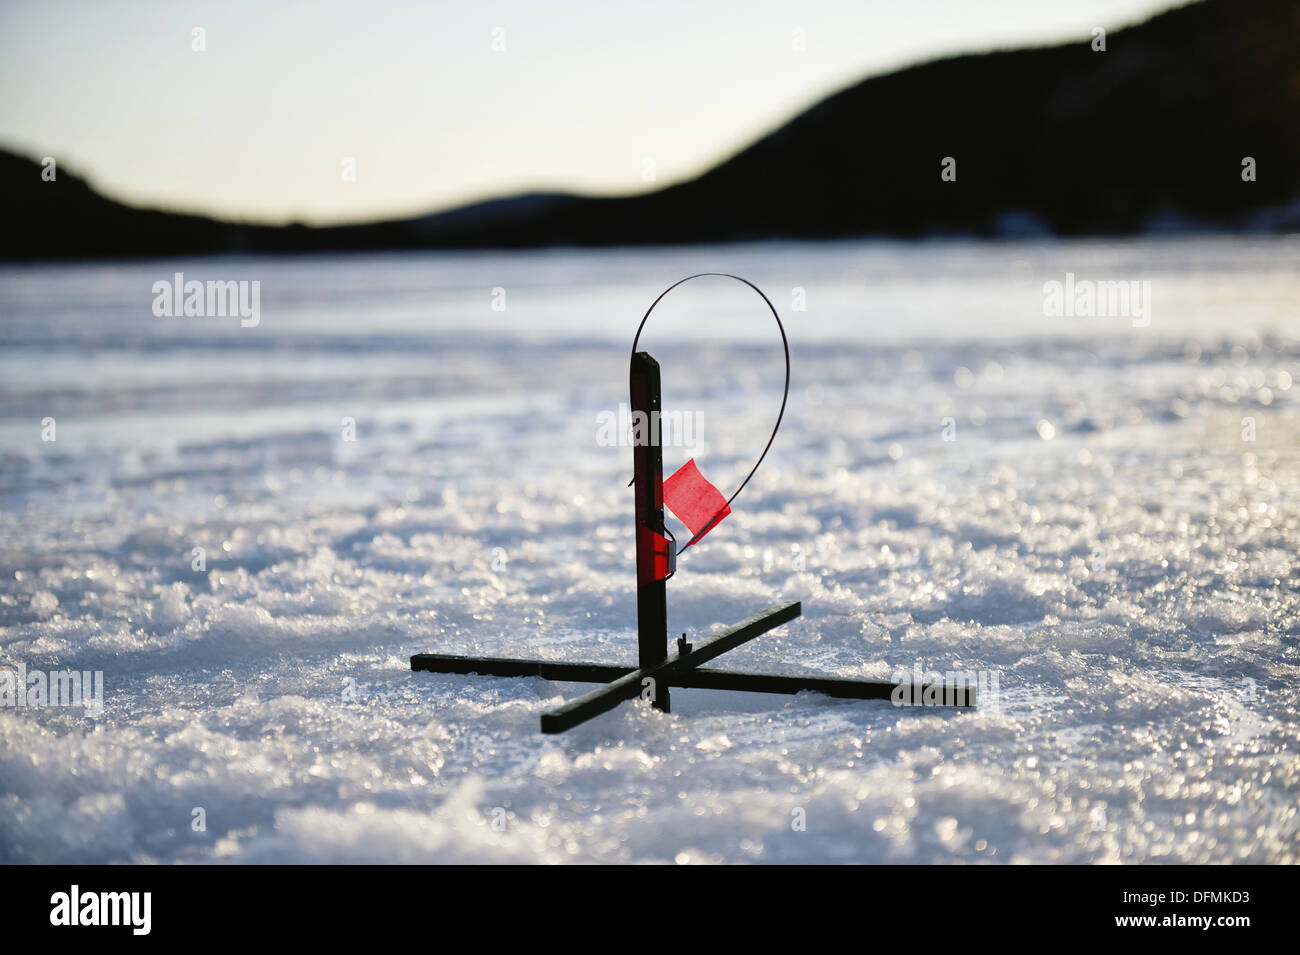 Silhouette of spring loaded ice-fishing hole marker on a frozen